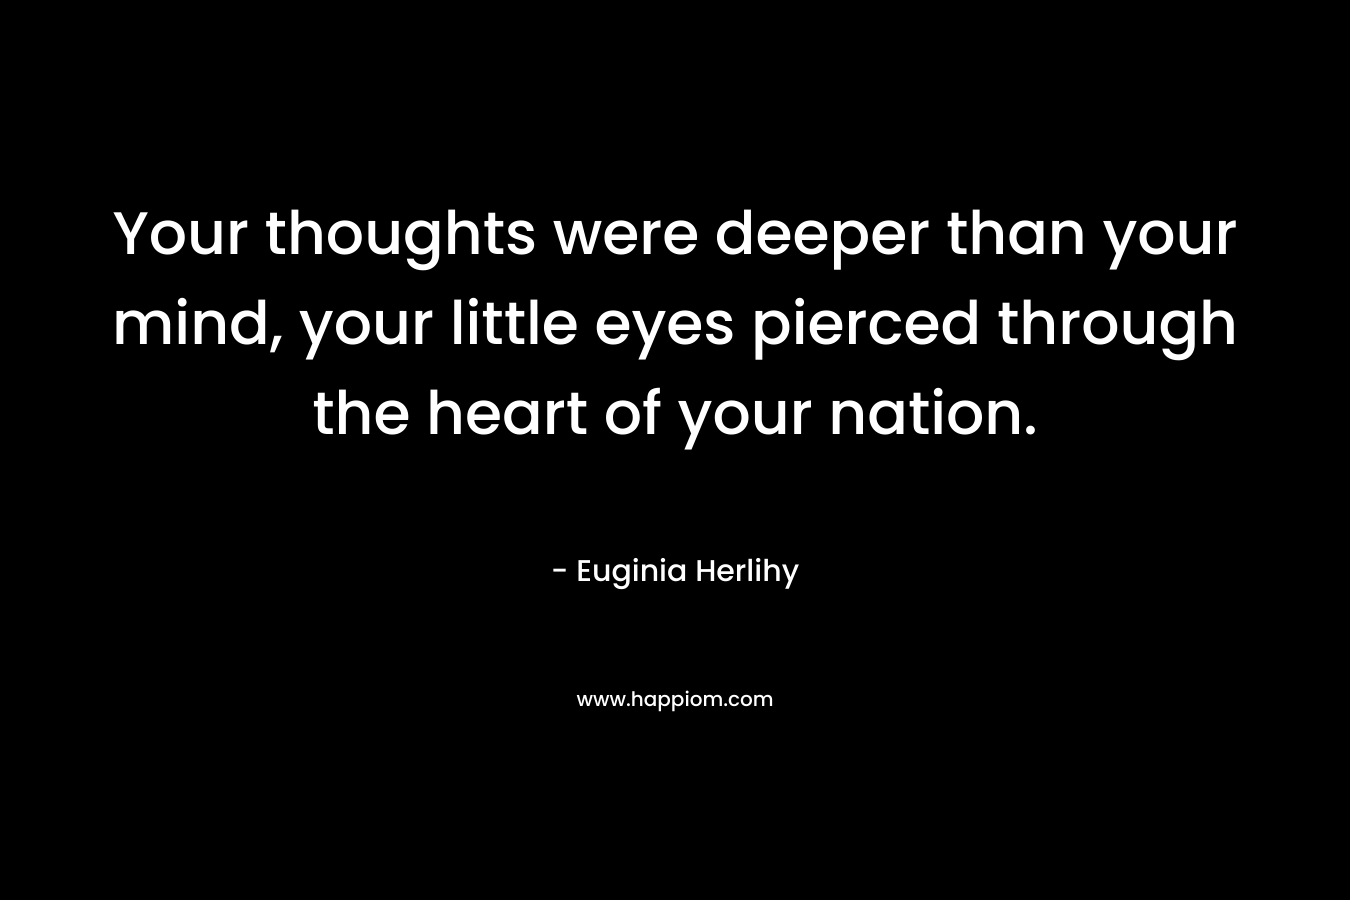 Your thoughts were deeper than your mind, your little eyes pierced through the heart of your nation.